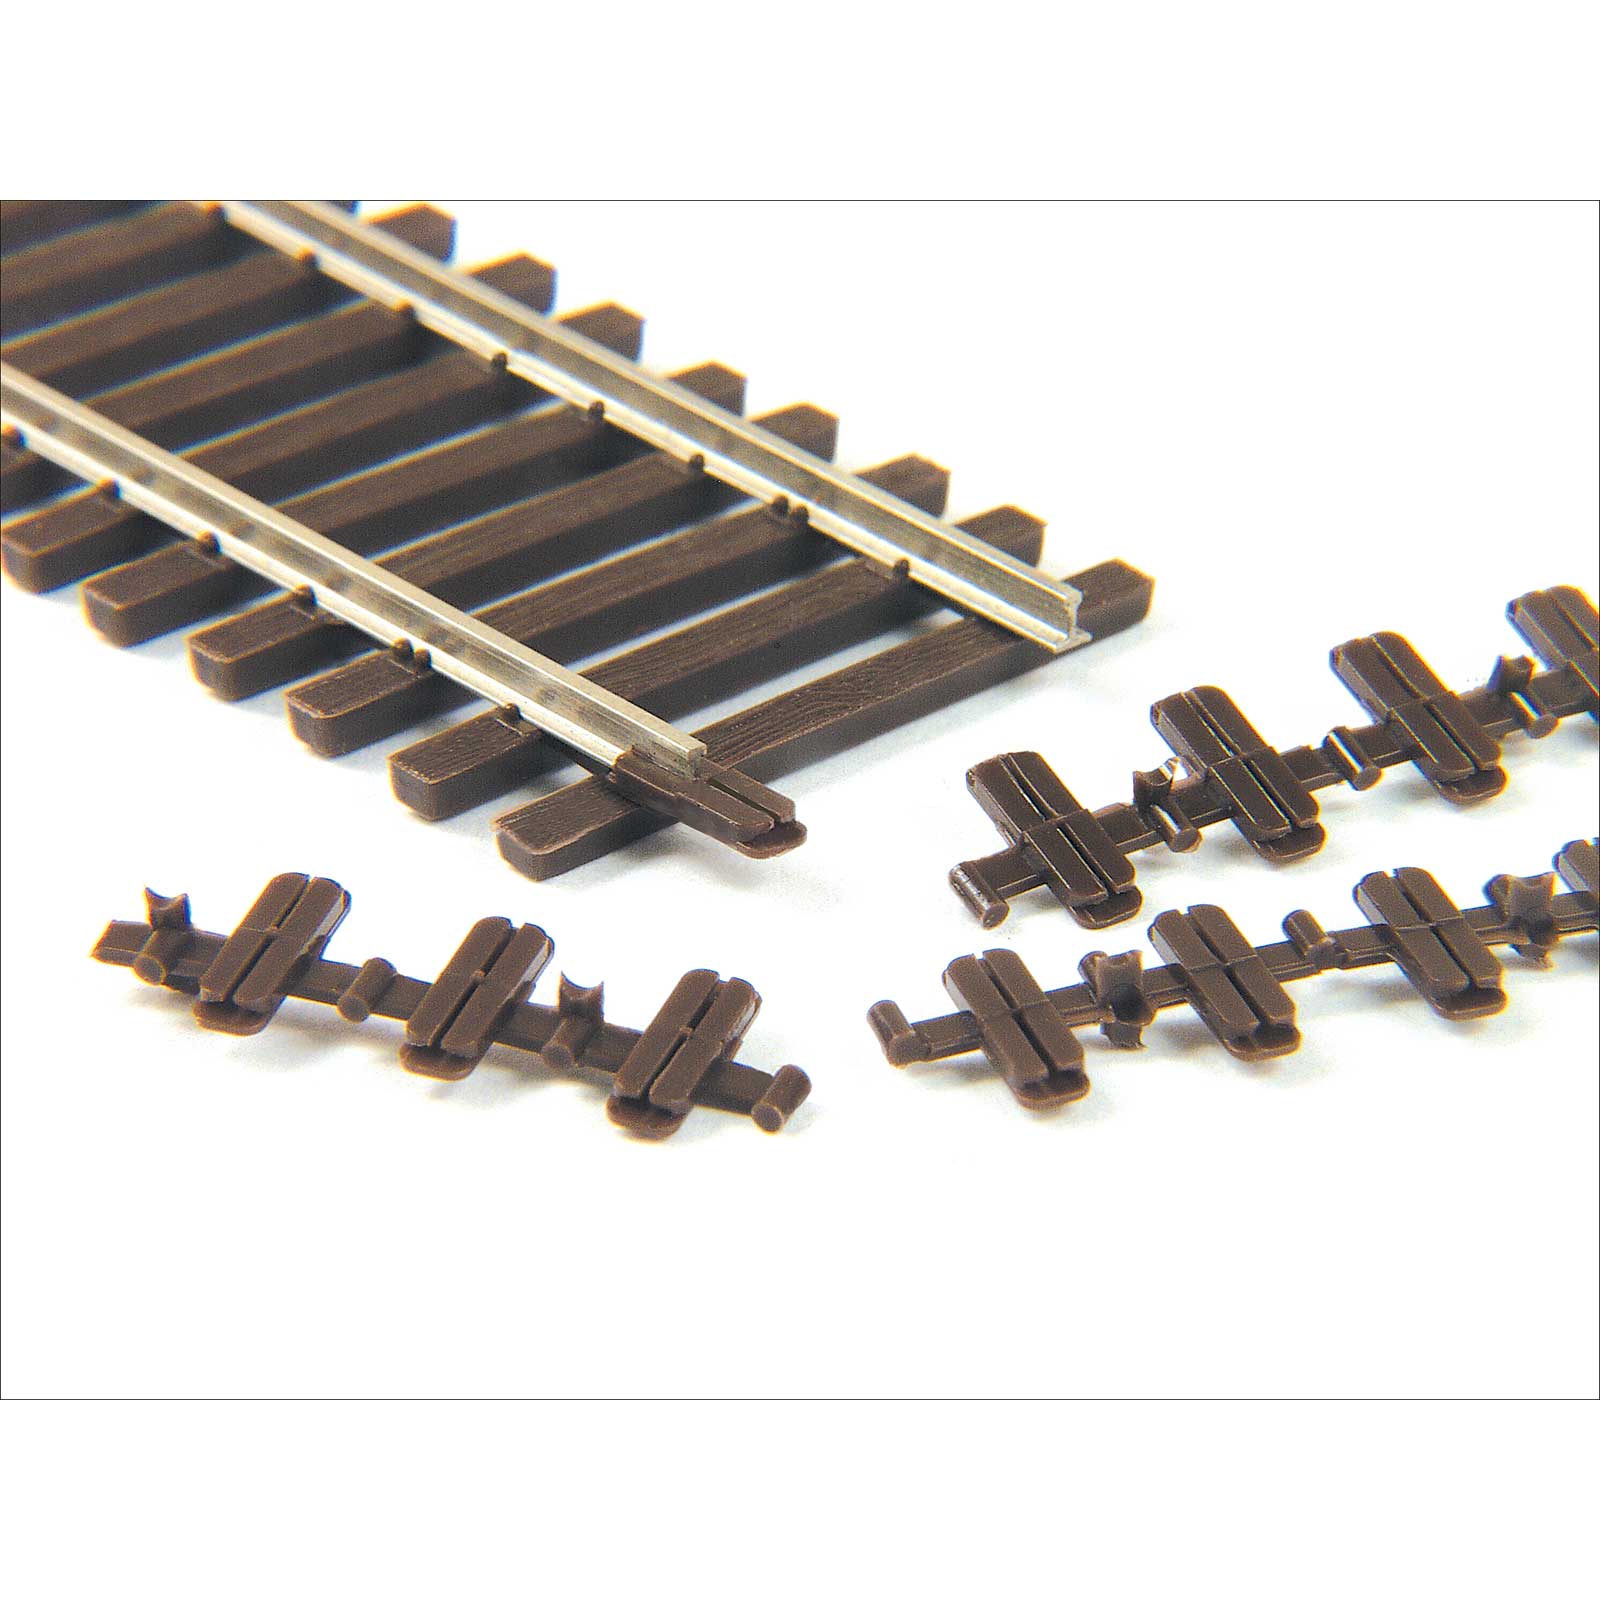 Insulated Rail Joiners for Code 70 Rail, (Pkg of 12)